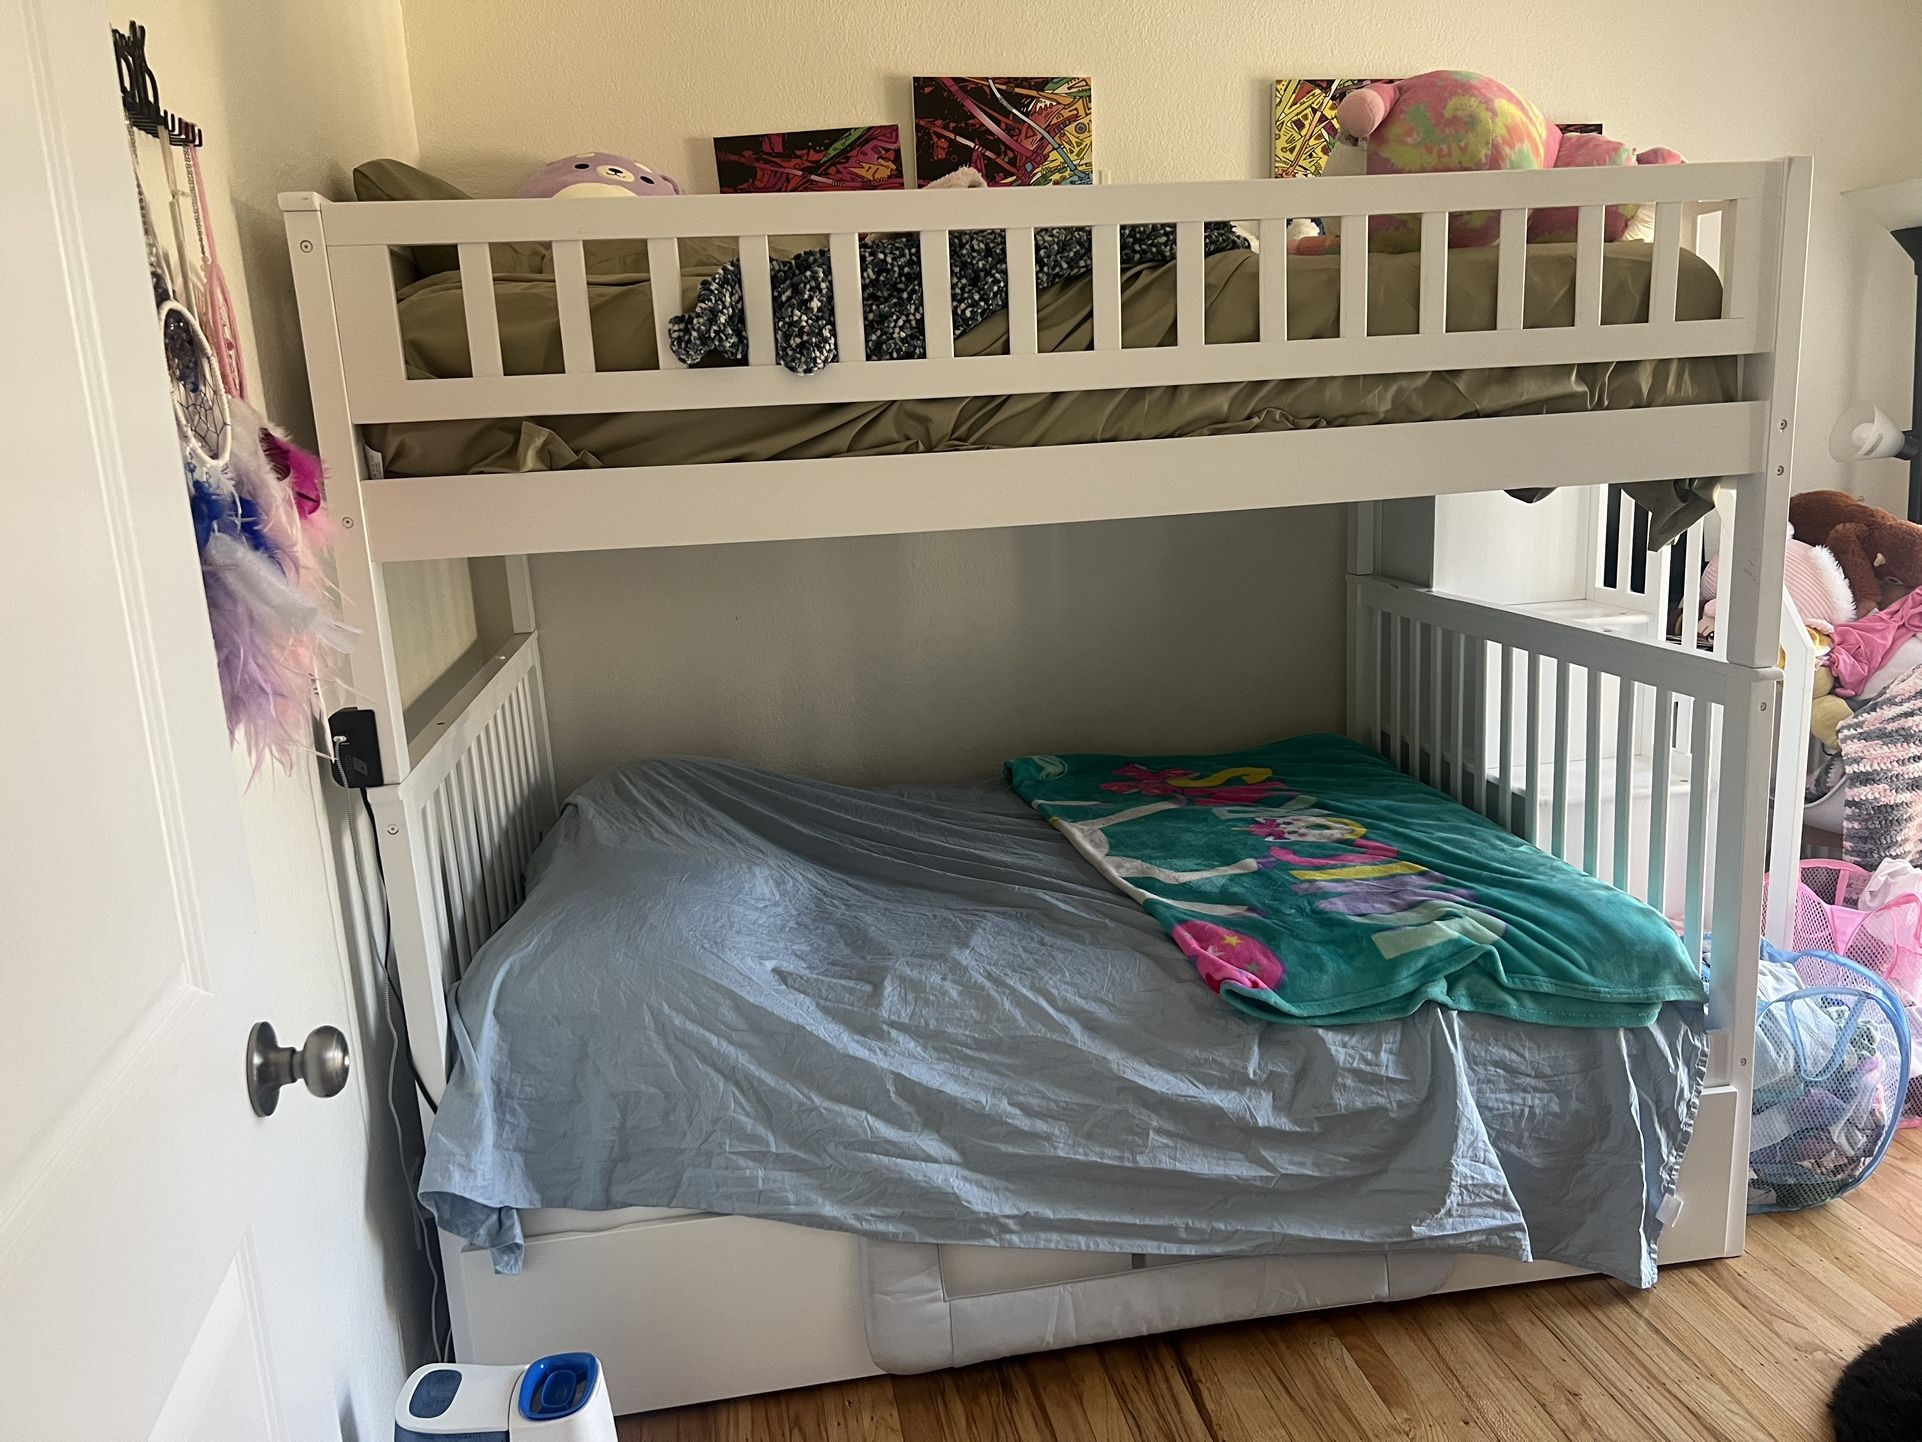 Full Sized Bunk Beds With Storage